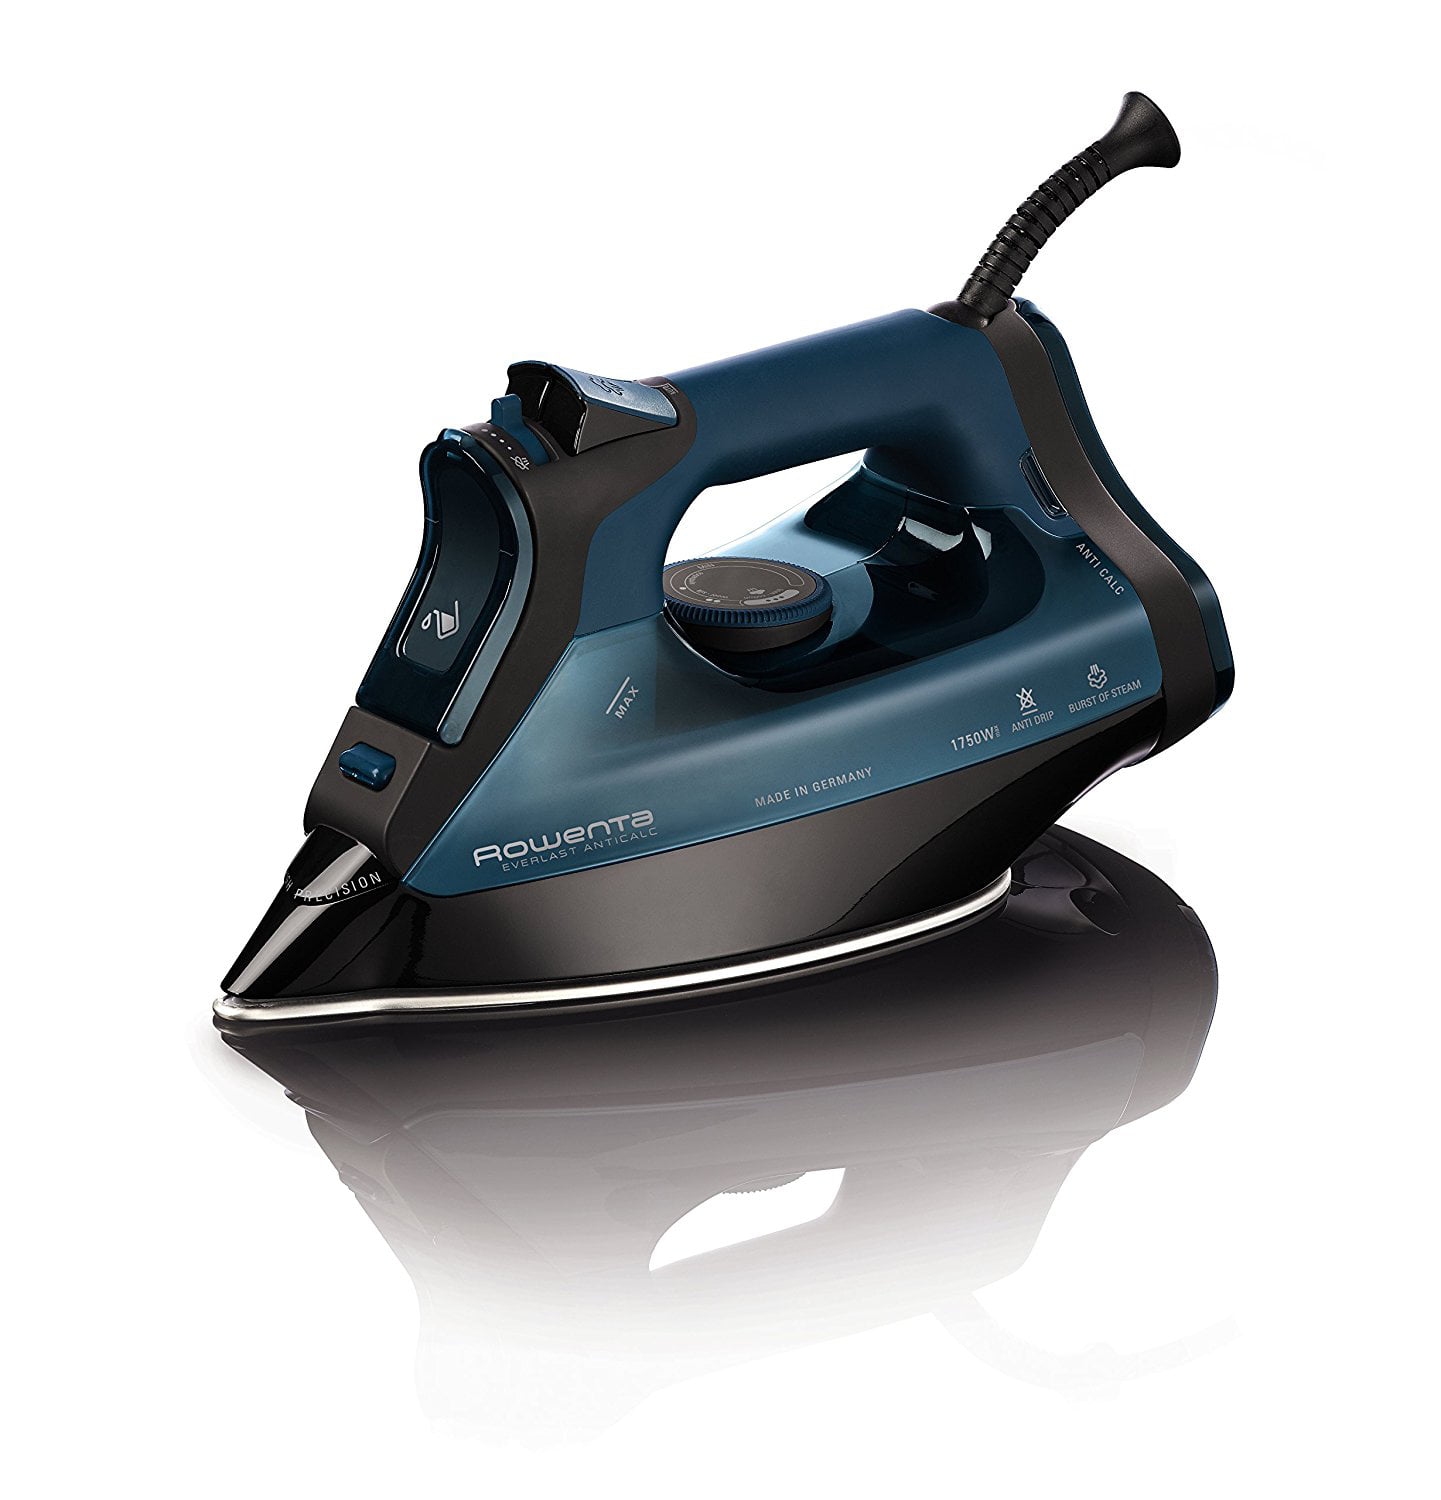 Rowenta Freemove Cordless Steam Iron w/ 400 Holes Stainless Steel Soleplate 